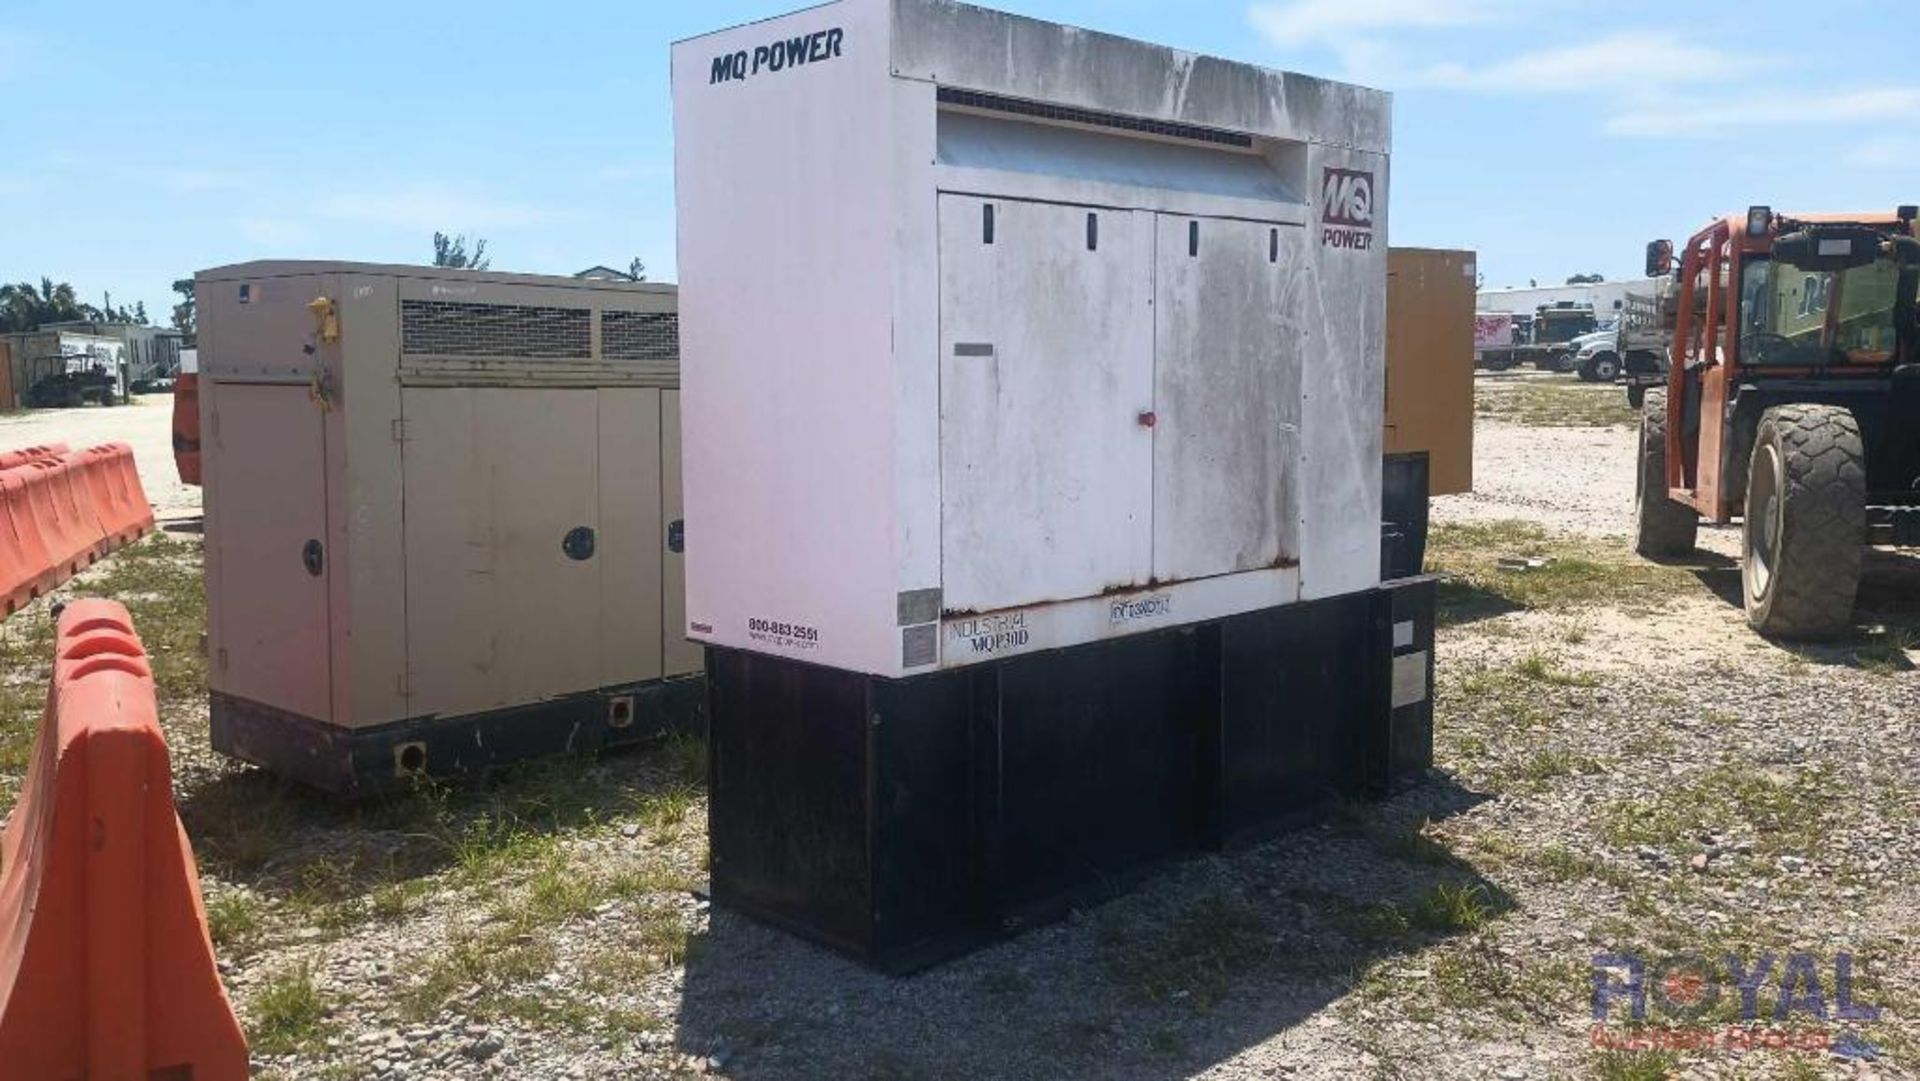 2006 MQP30D Stationary Diesel Generator w/ Fuel Tank - Image 4 of 11